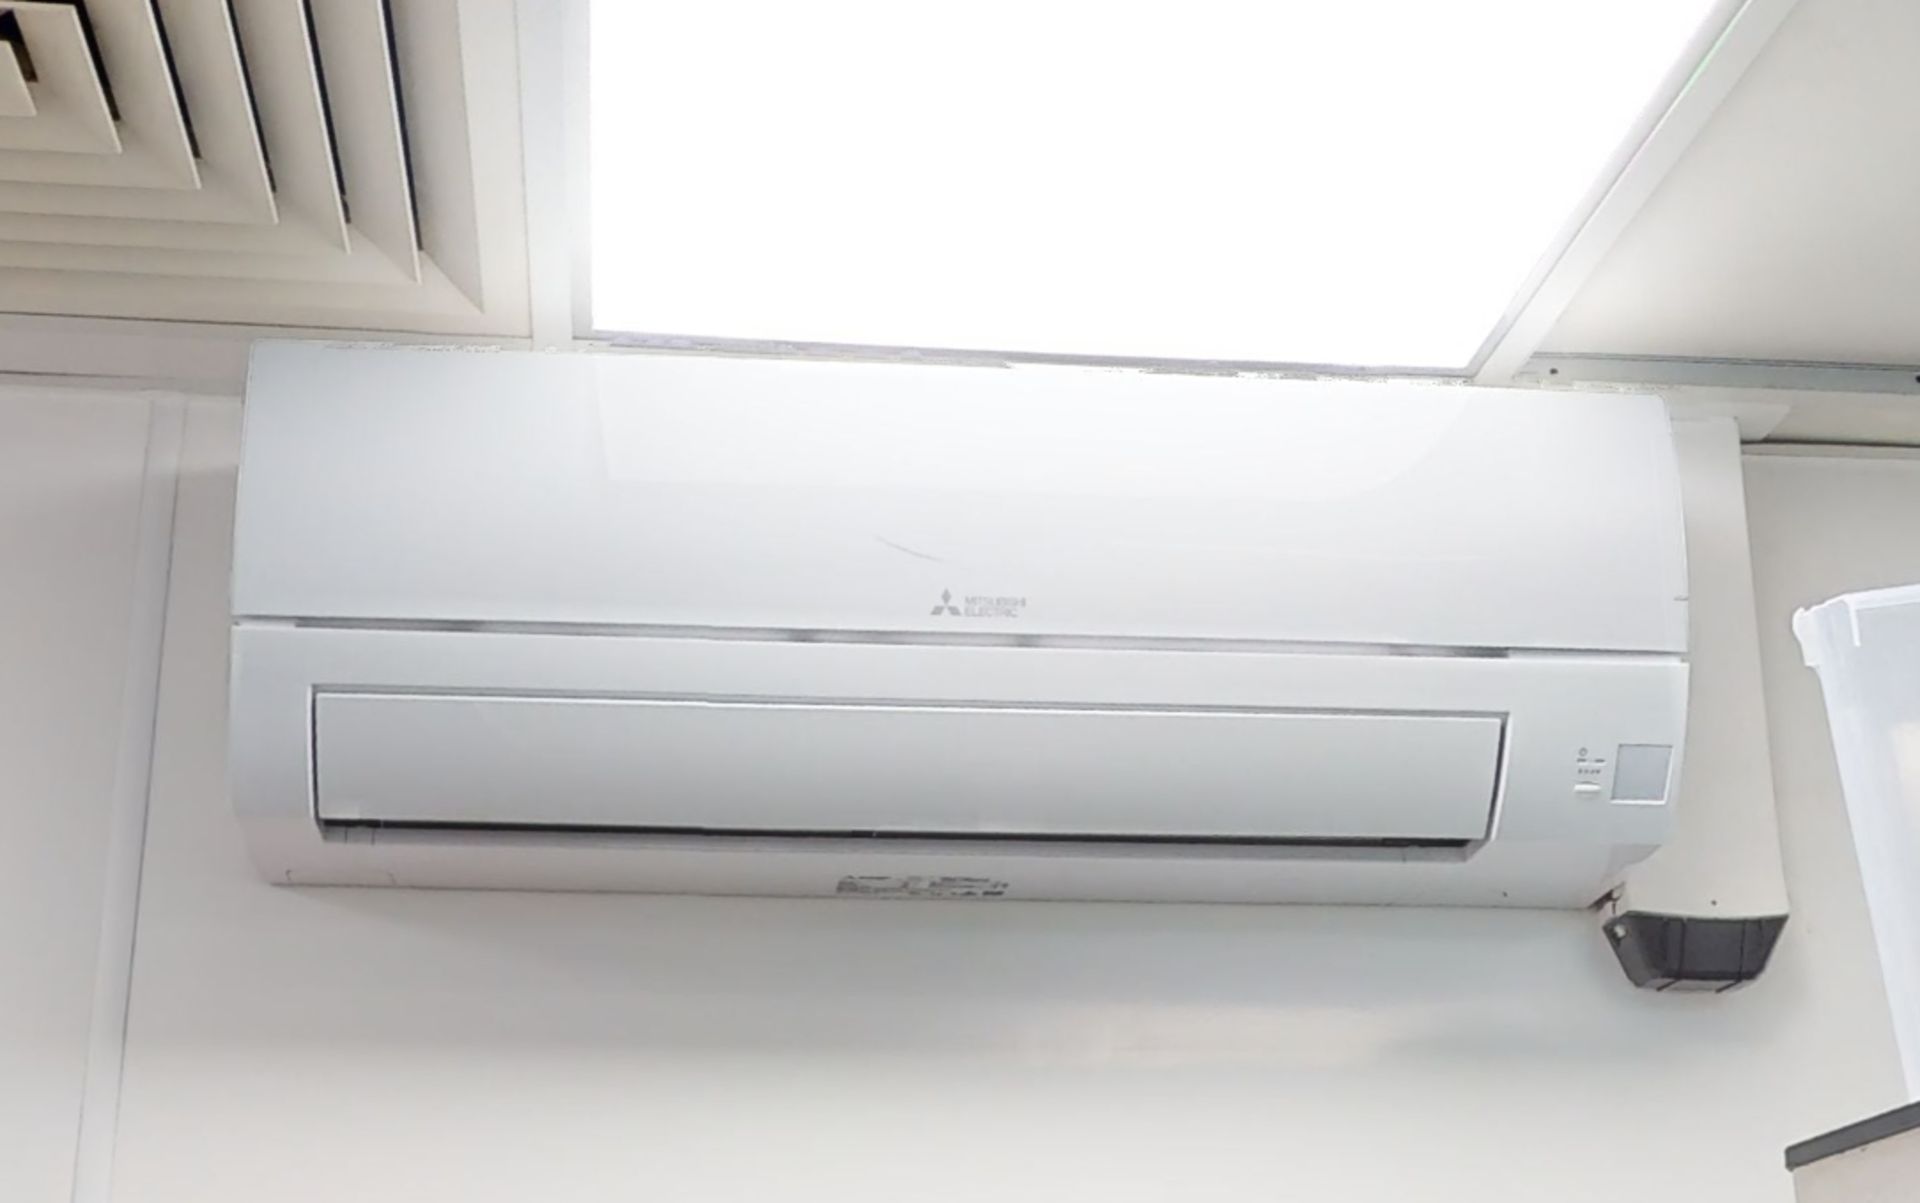 1 x Mitsubishi Room Air Condition Cassette With Outdoor Unit - Model MSZ-HR50VF - Image 2 of 4